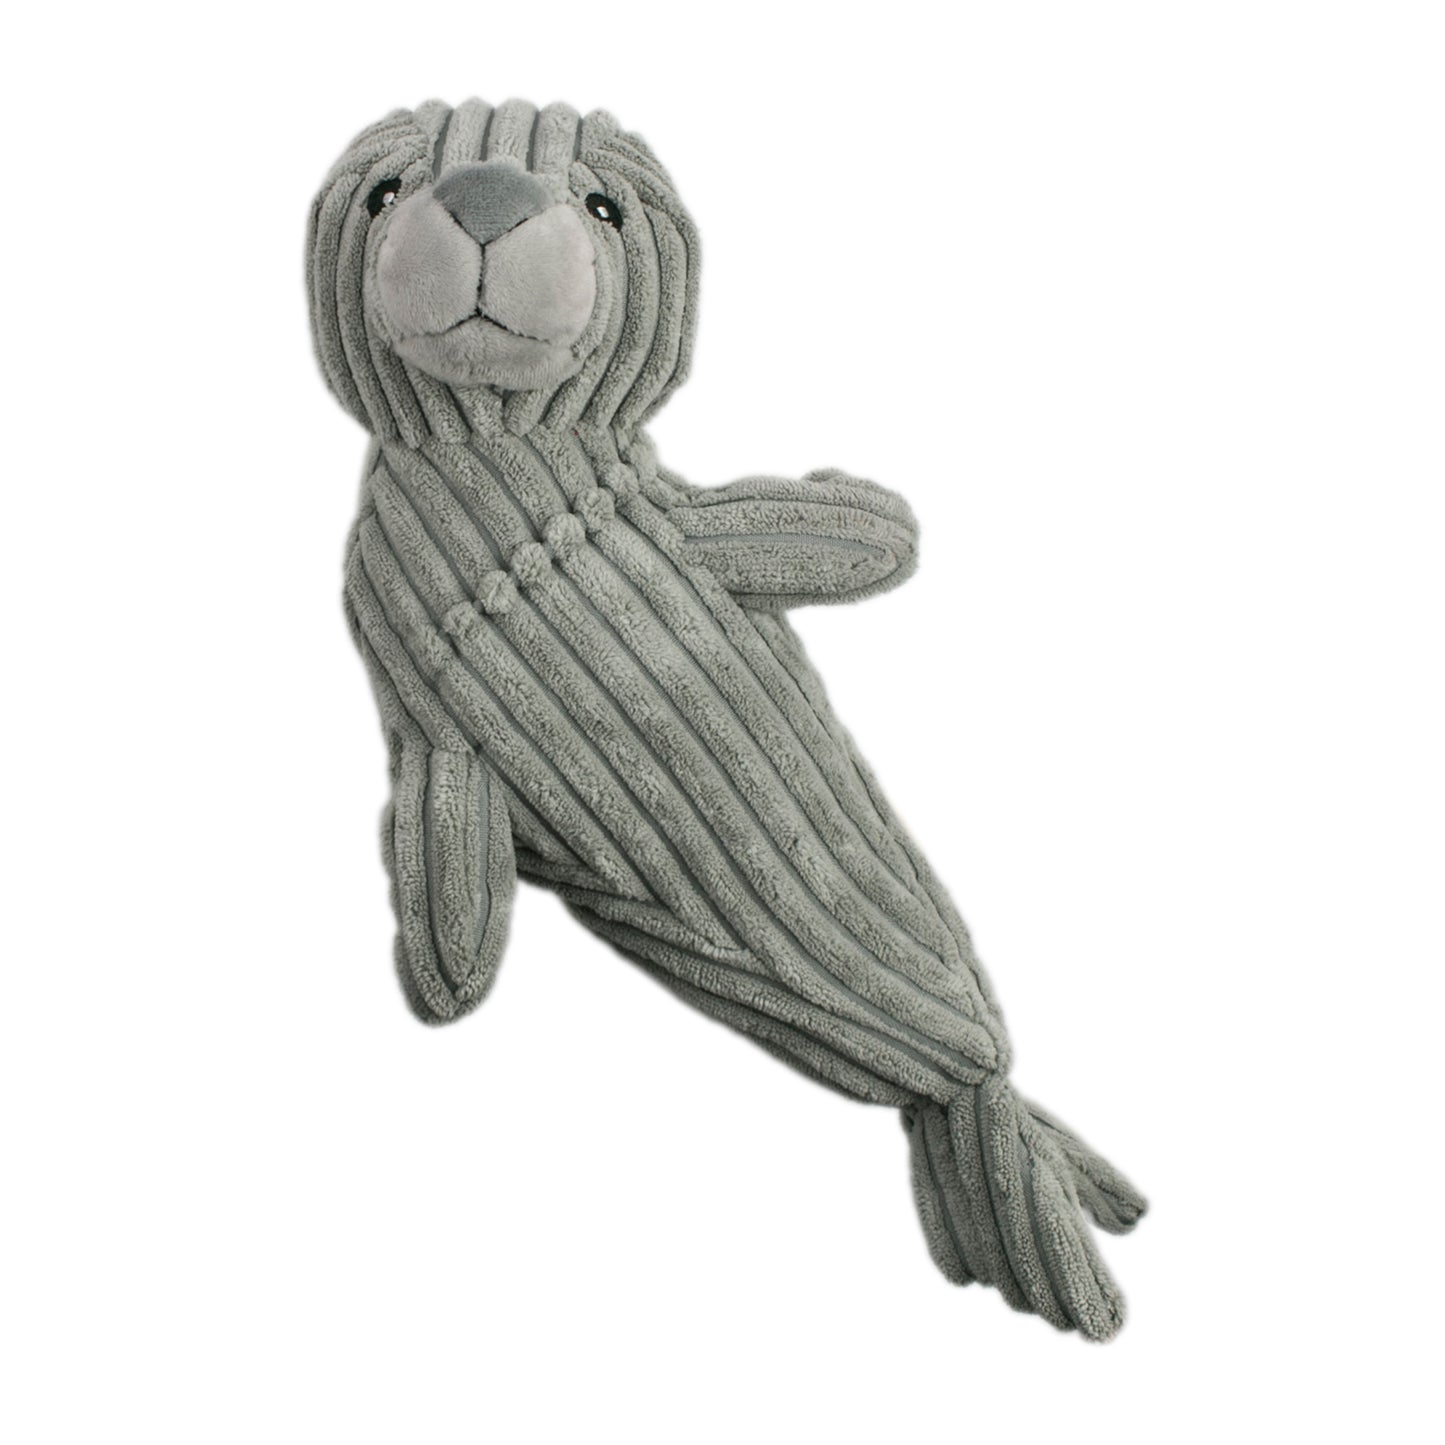 Seal Toy